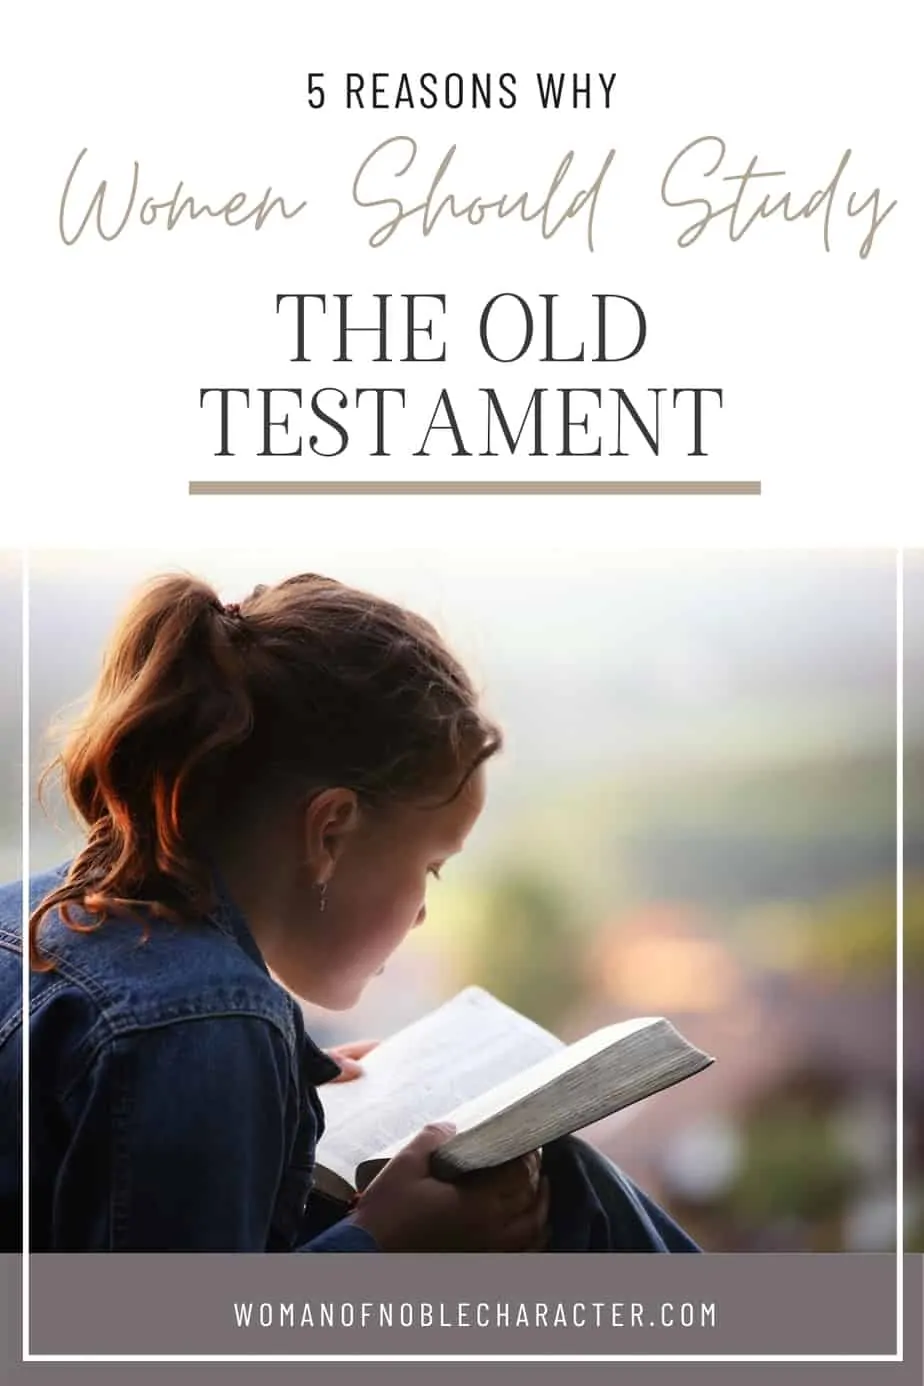 An image of a young girl reading a bible with the title, "5 reasons why women should study the old testament"